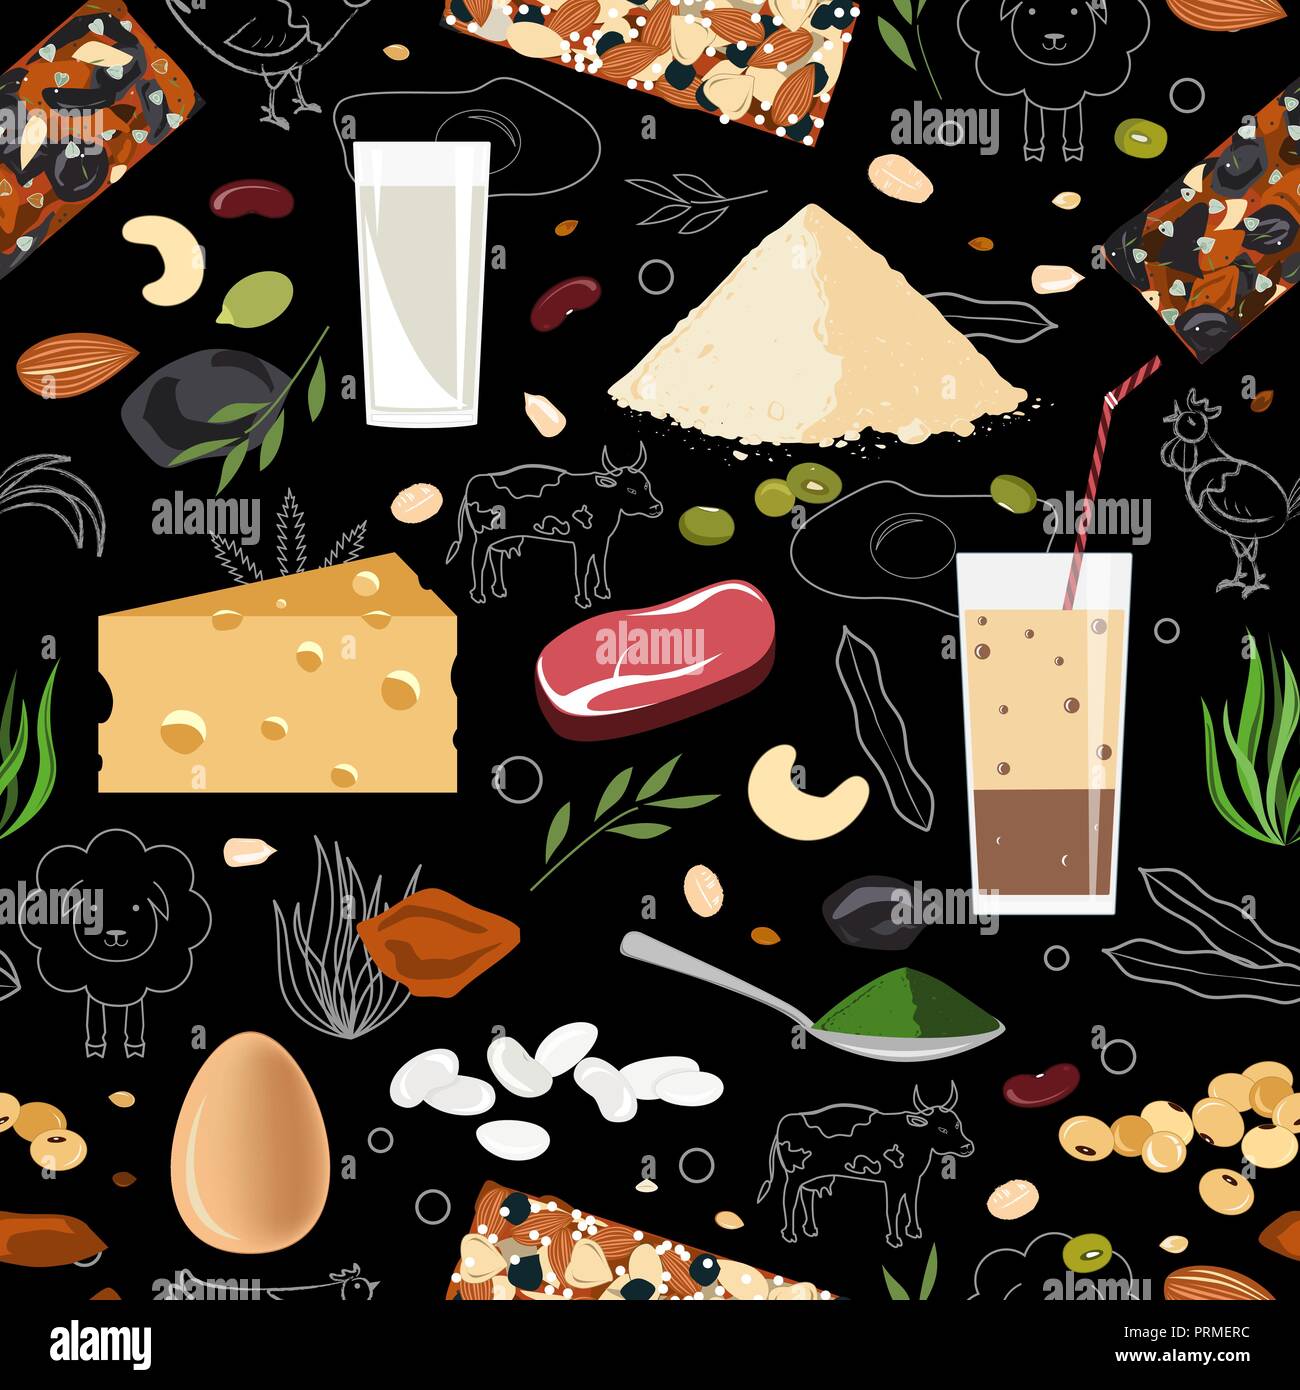 Sports and healthy eating nutrition seamless pattern. Animal and vegan protein food Stock Vector